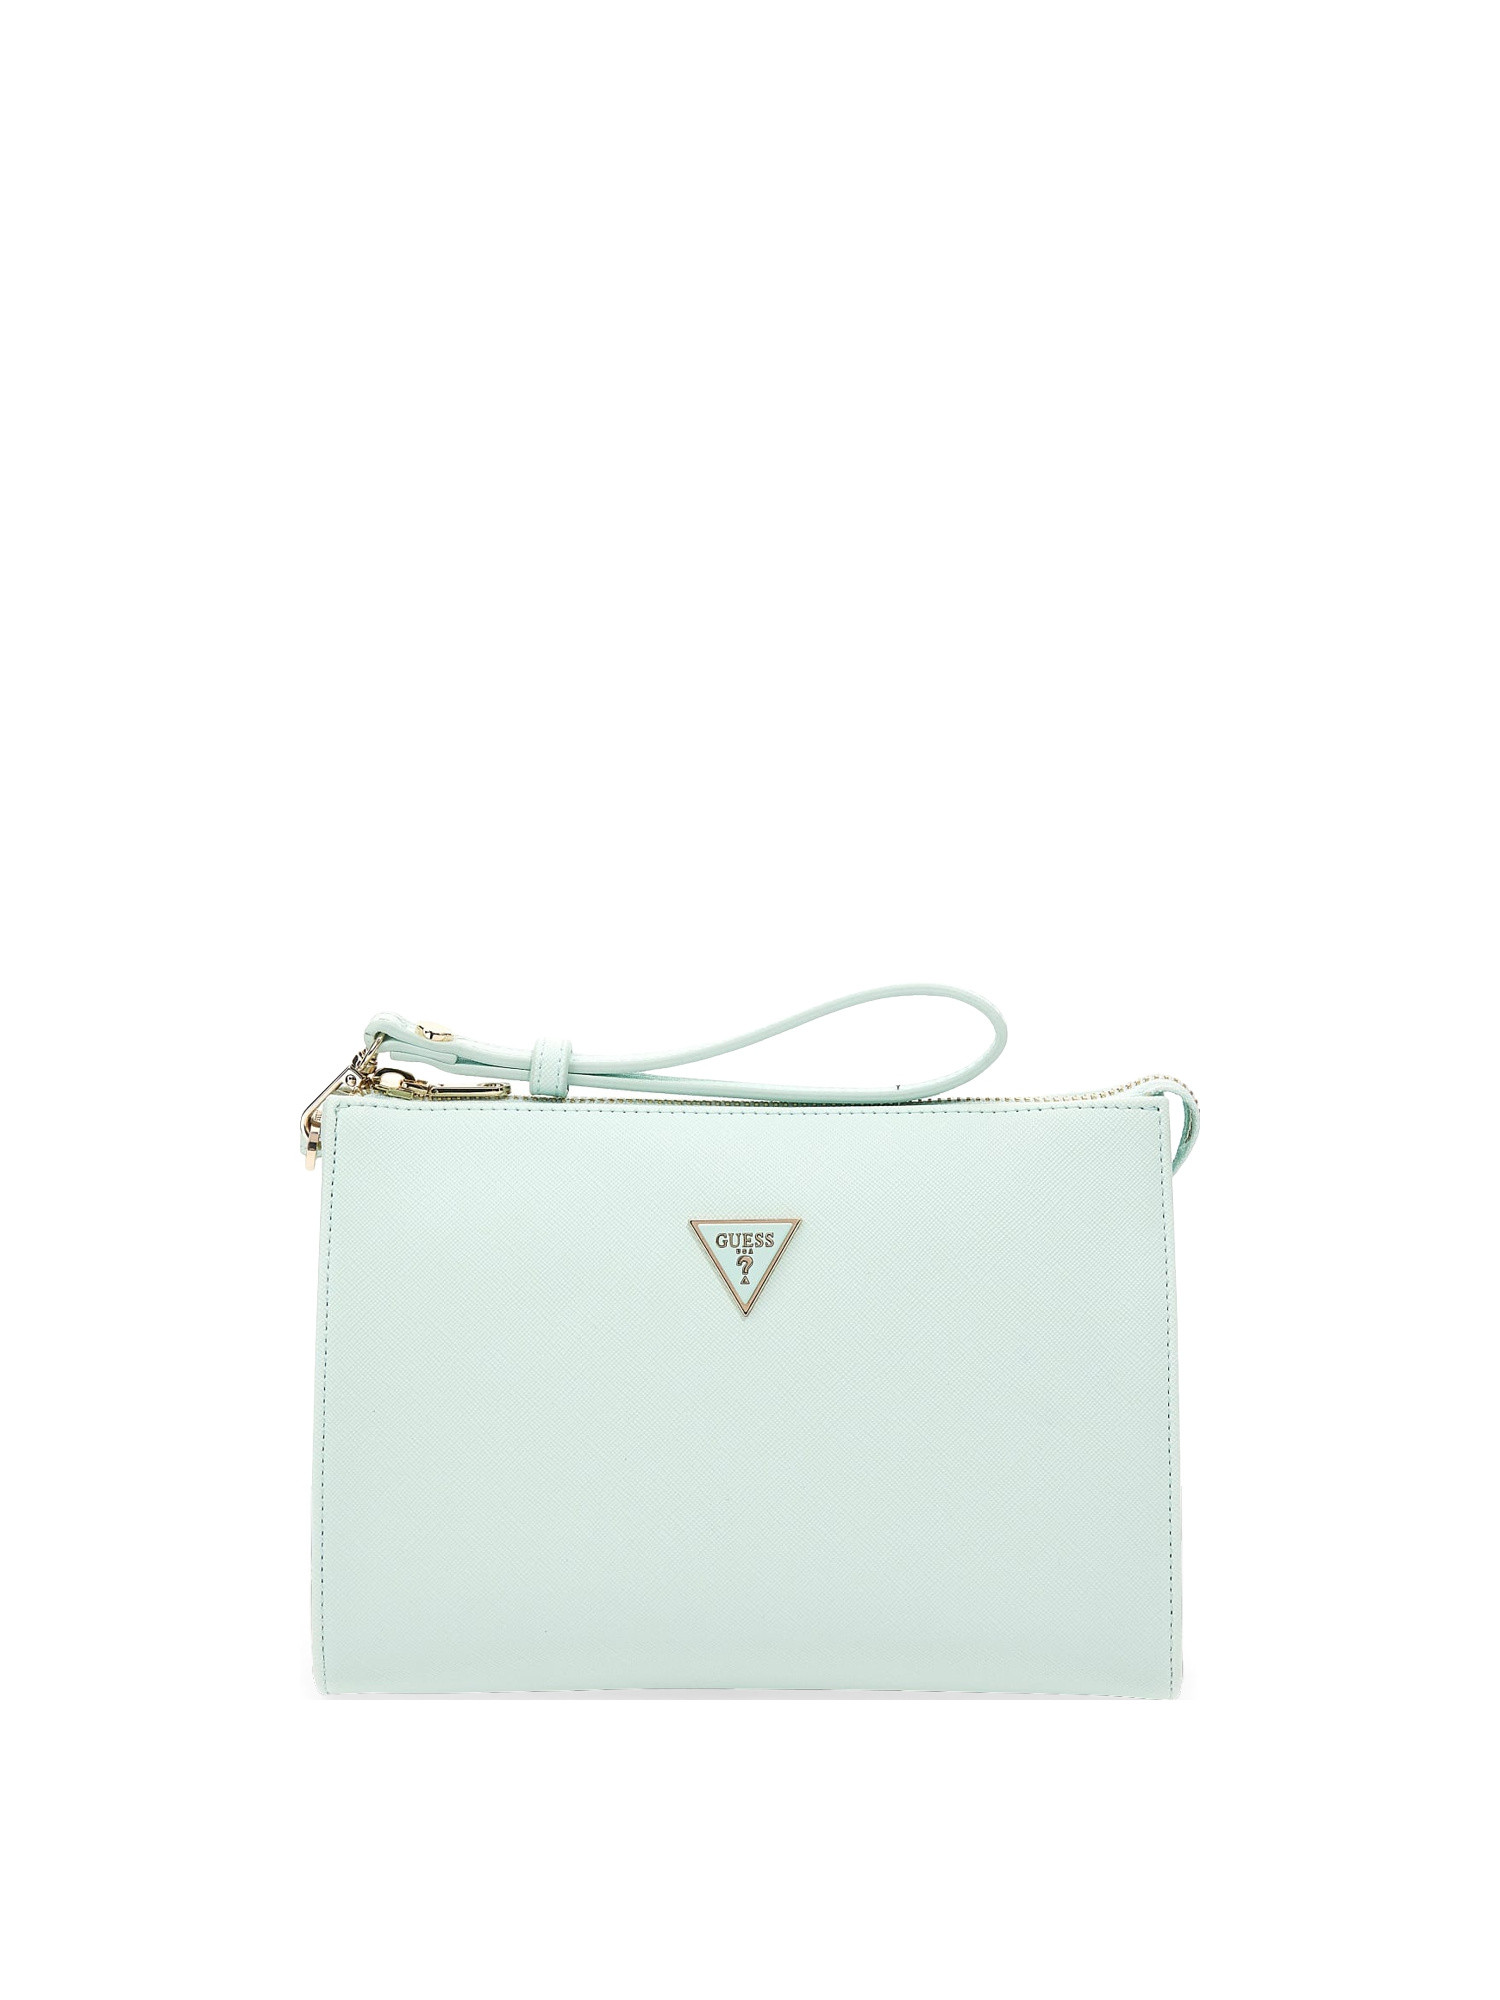 Guess - Logo pouch, Light Green, large image number 0